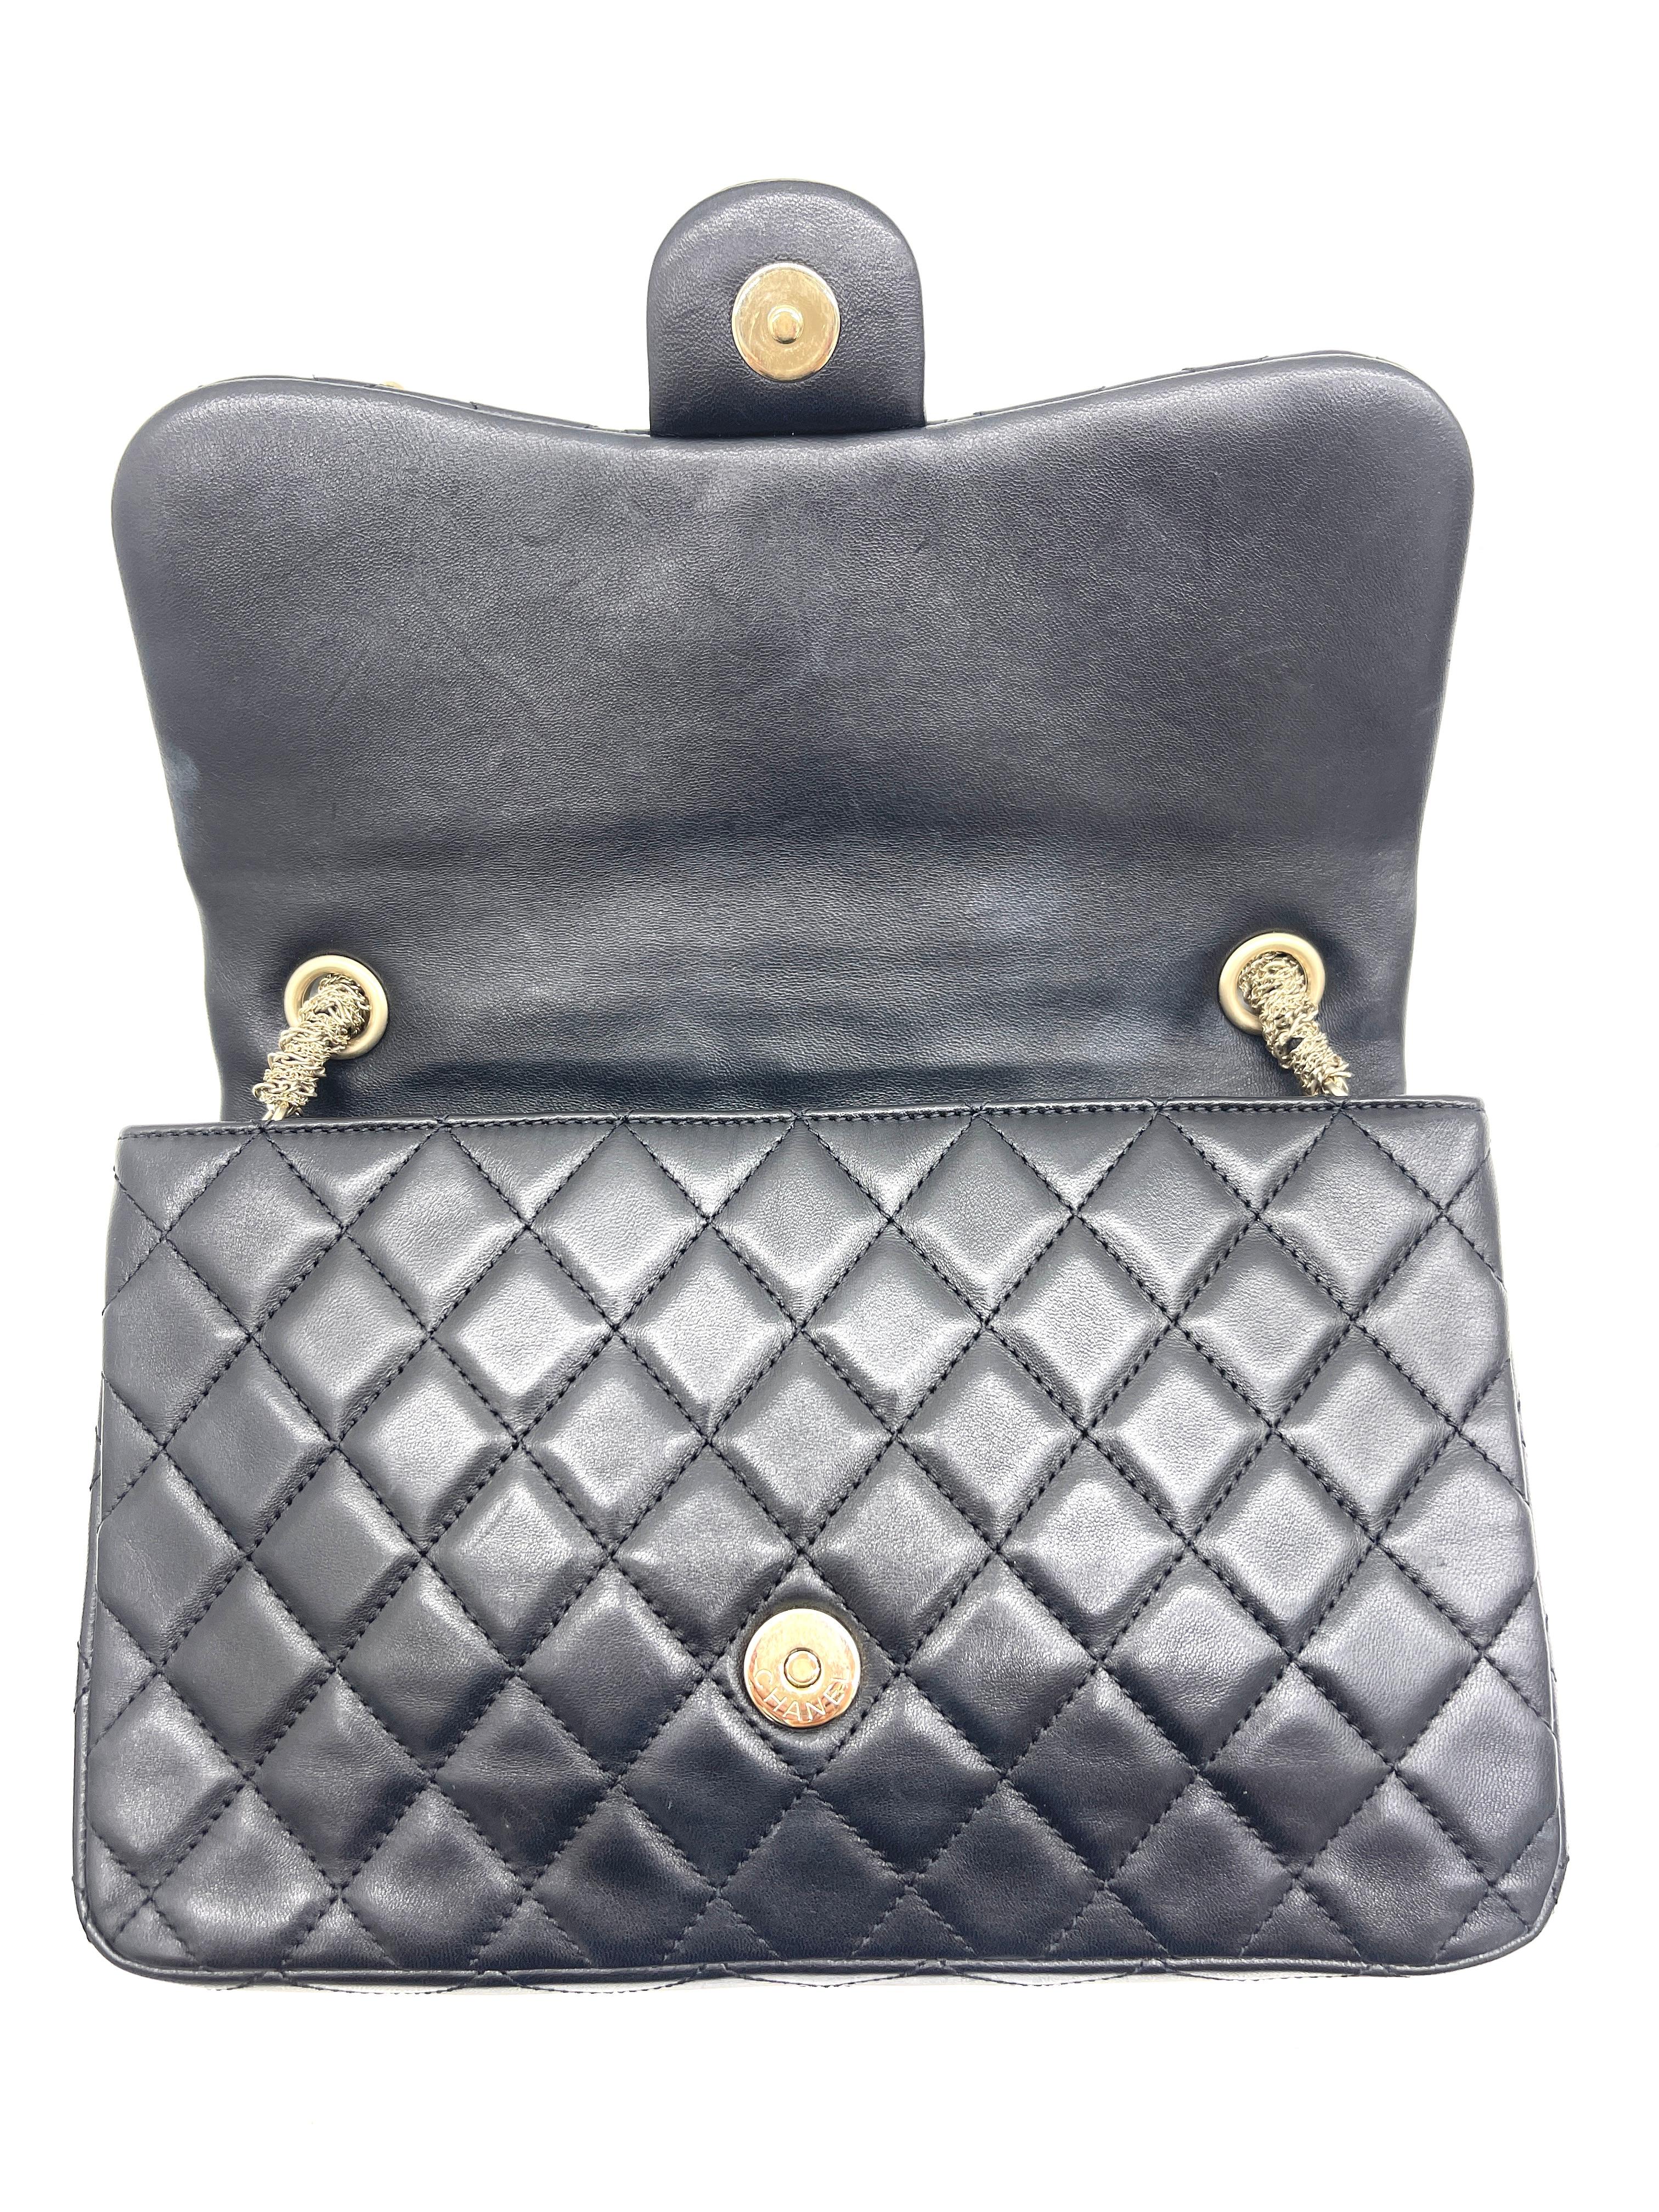 WOMENS DESIGNER Chanel black quilted lambskin medium westminster pearl flap bag For Sale 3